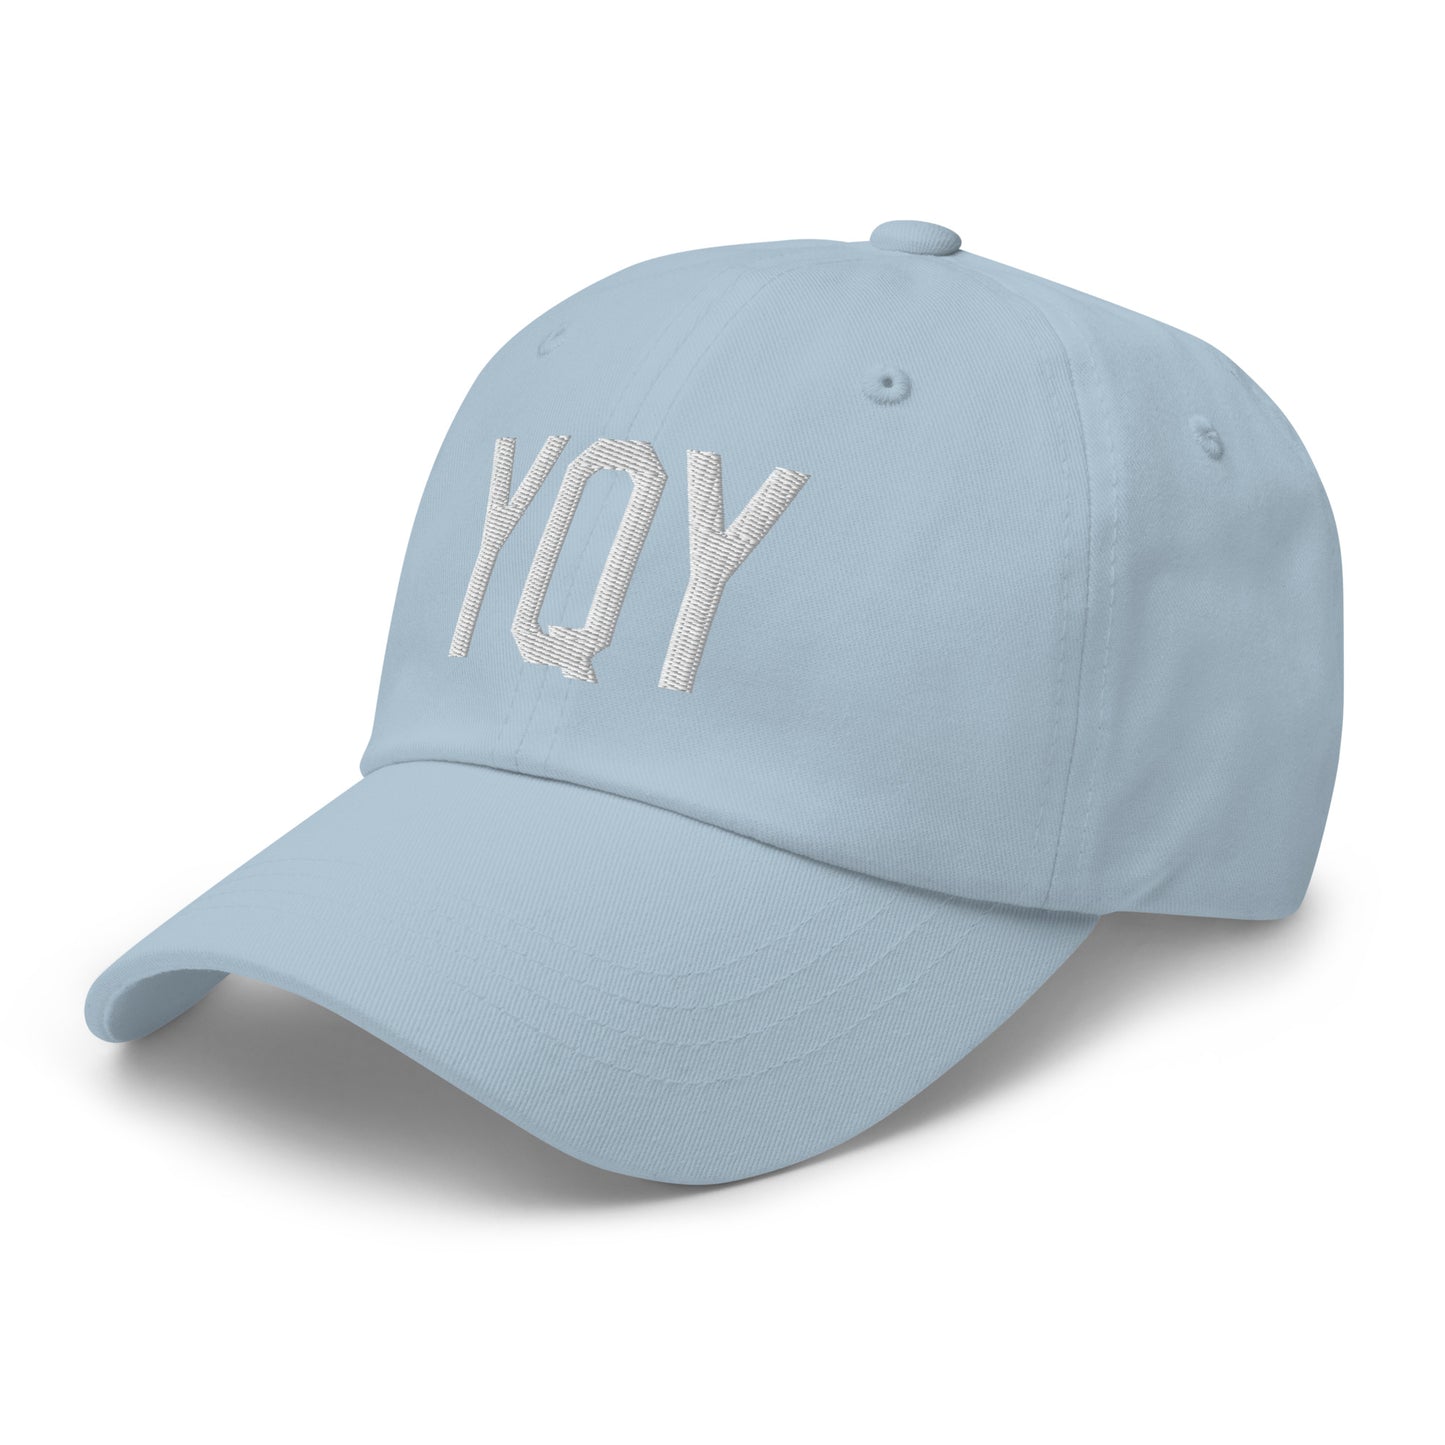 Airport Code Baseball Cap - White • YQY Sydney • YHM Designs - Image 30